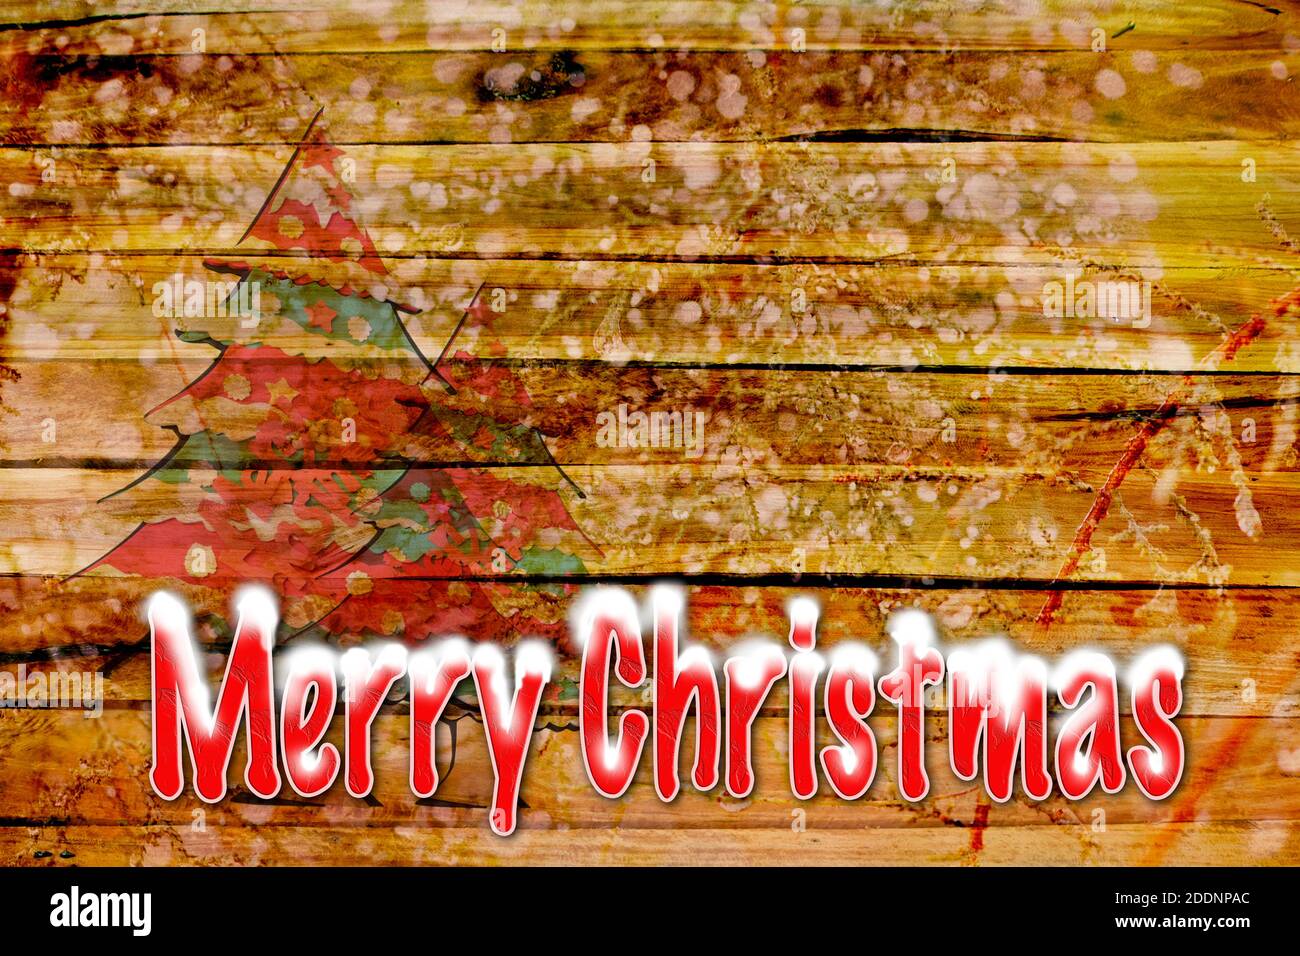 Christms tree and wooden background with snow over words merry christmas. Stock Photo